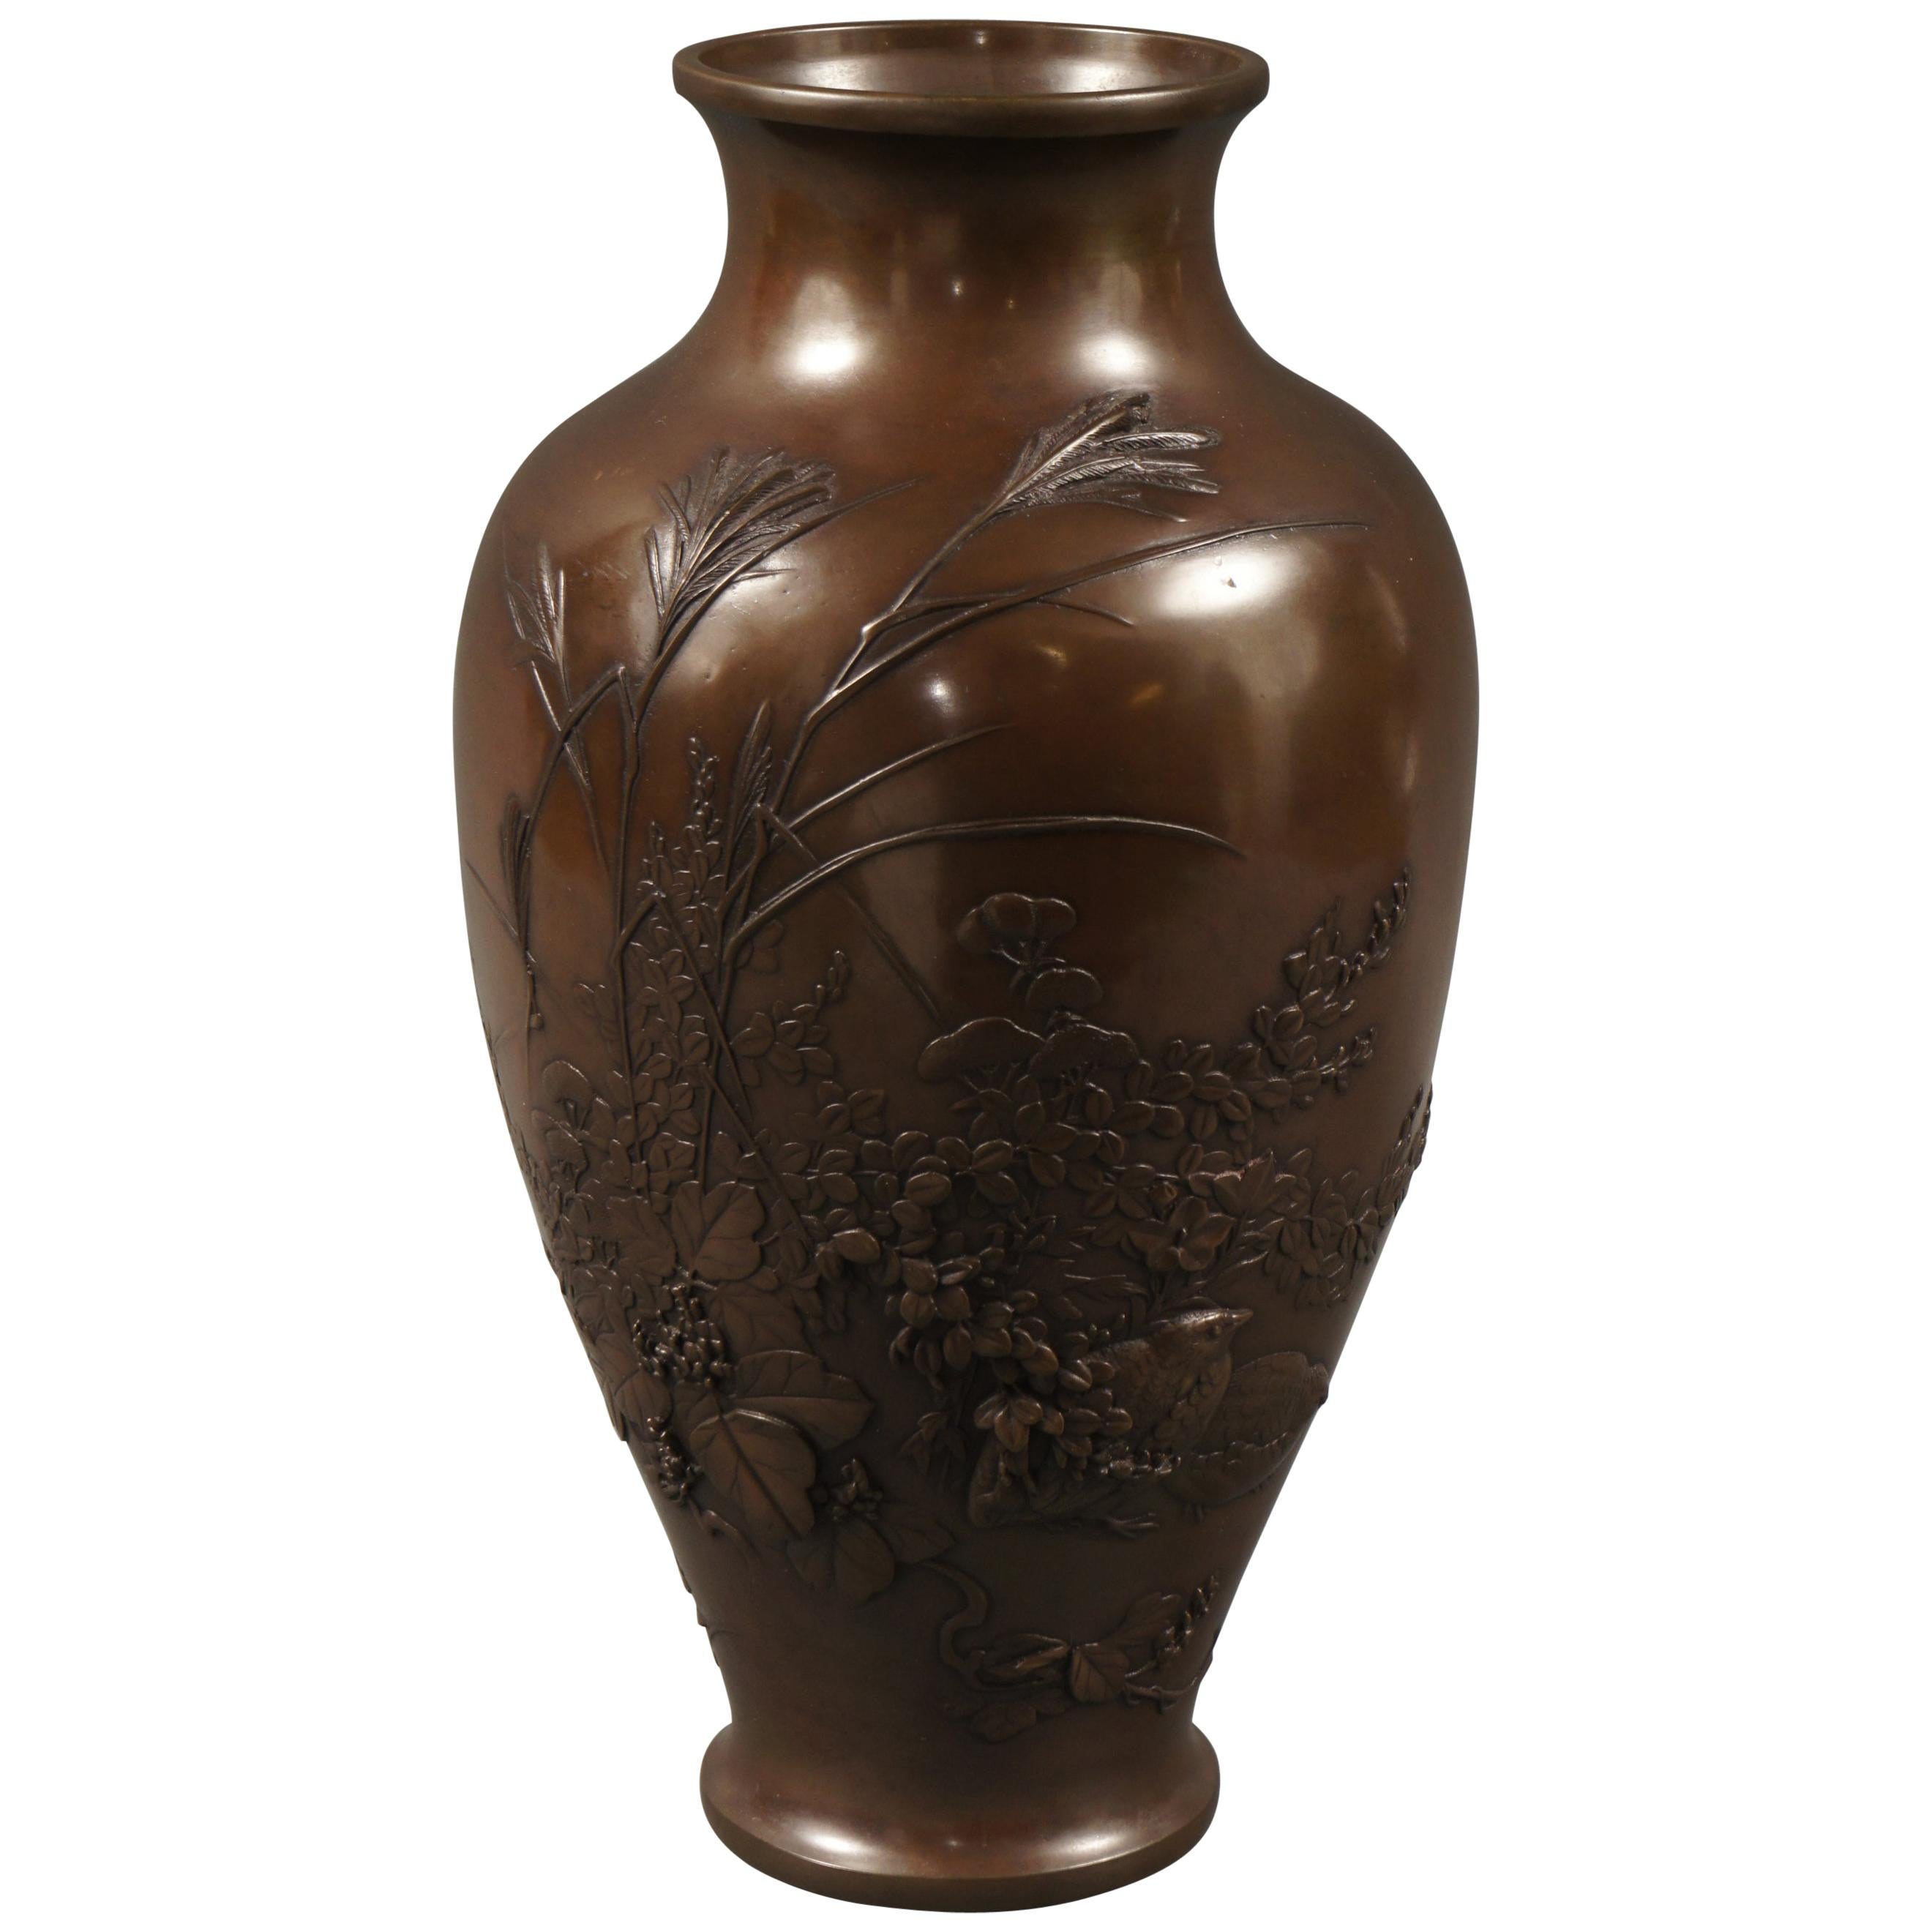 Meiji Period Japanese Bronze Vase with Grasses and Quail Design For Sale